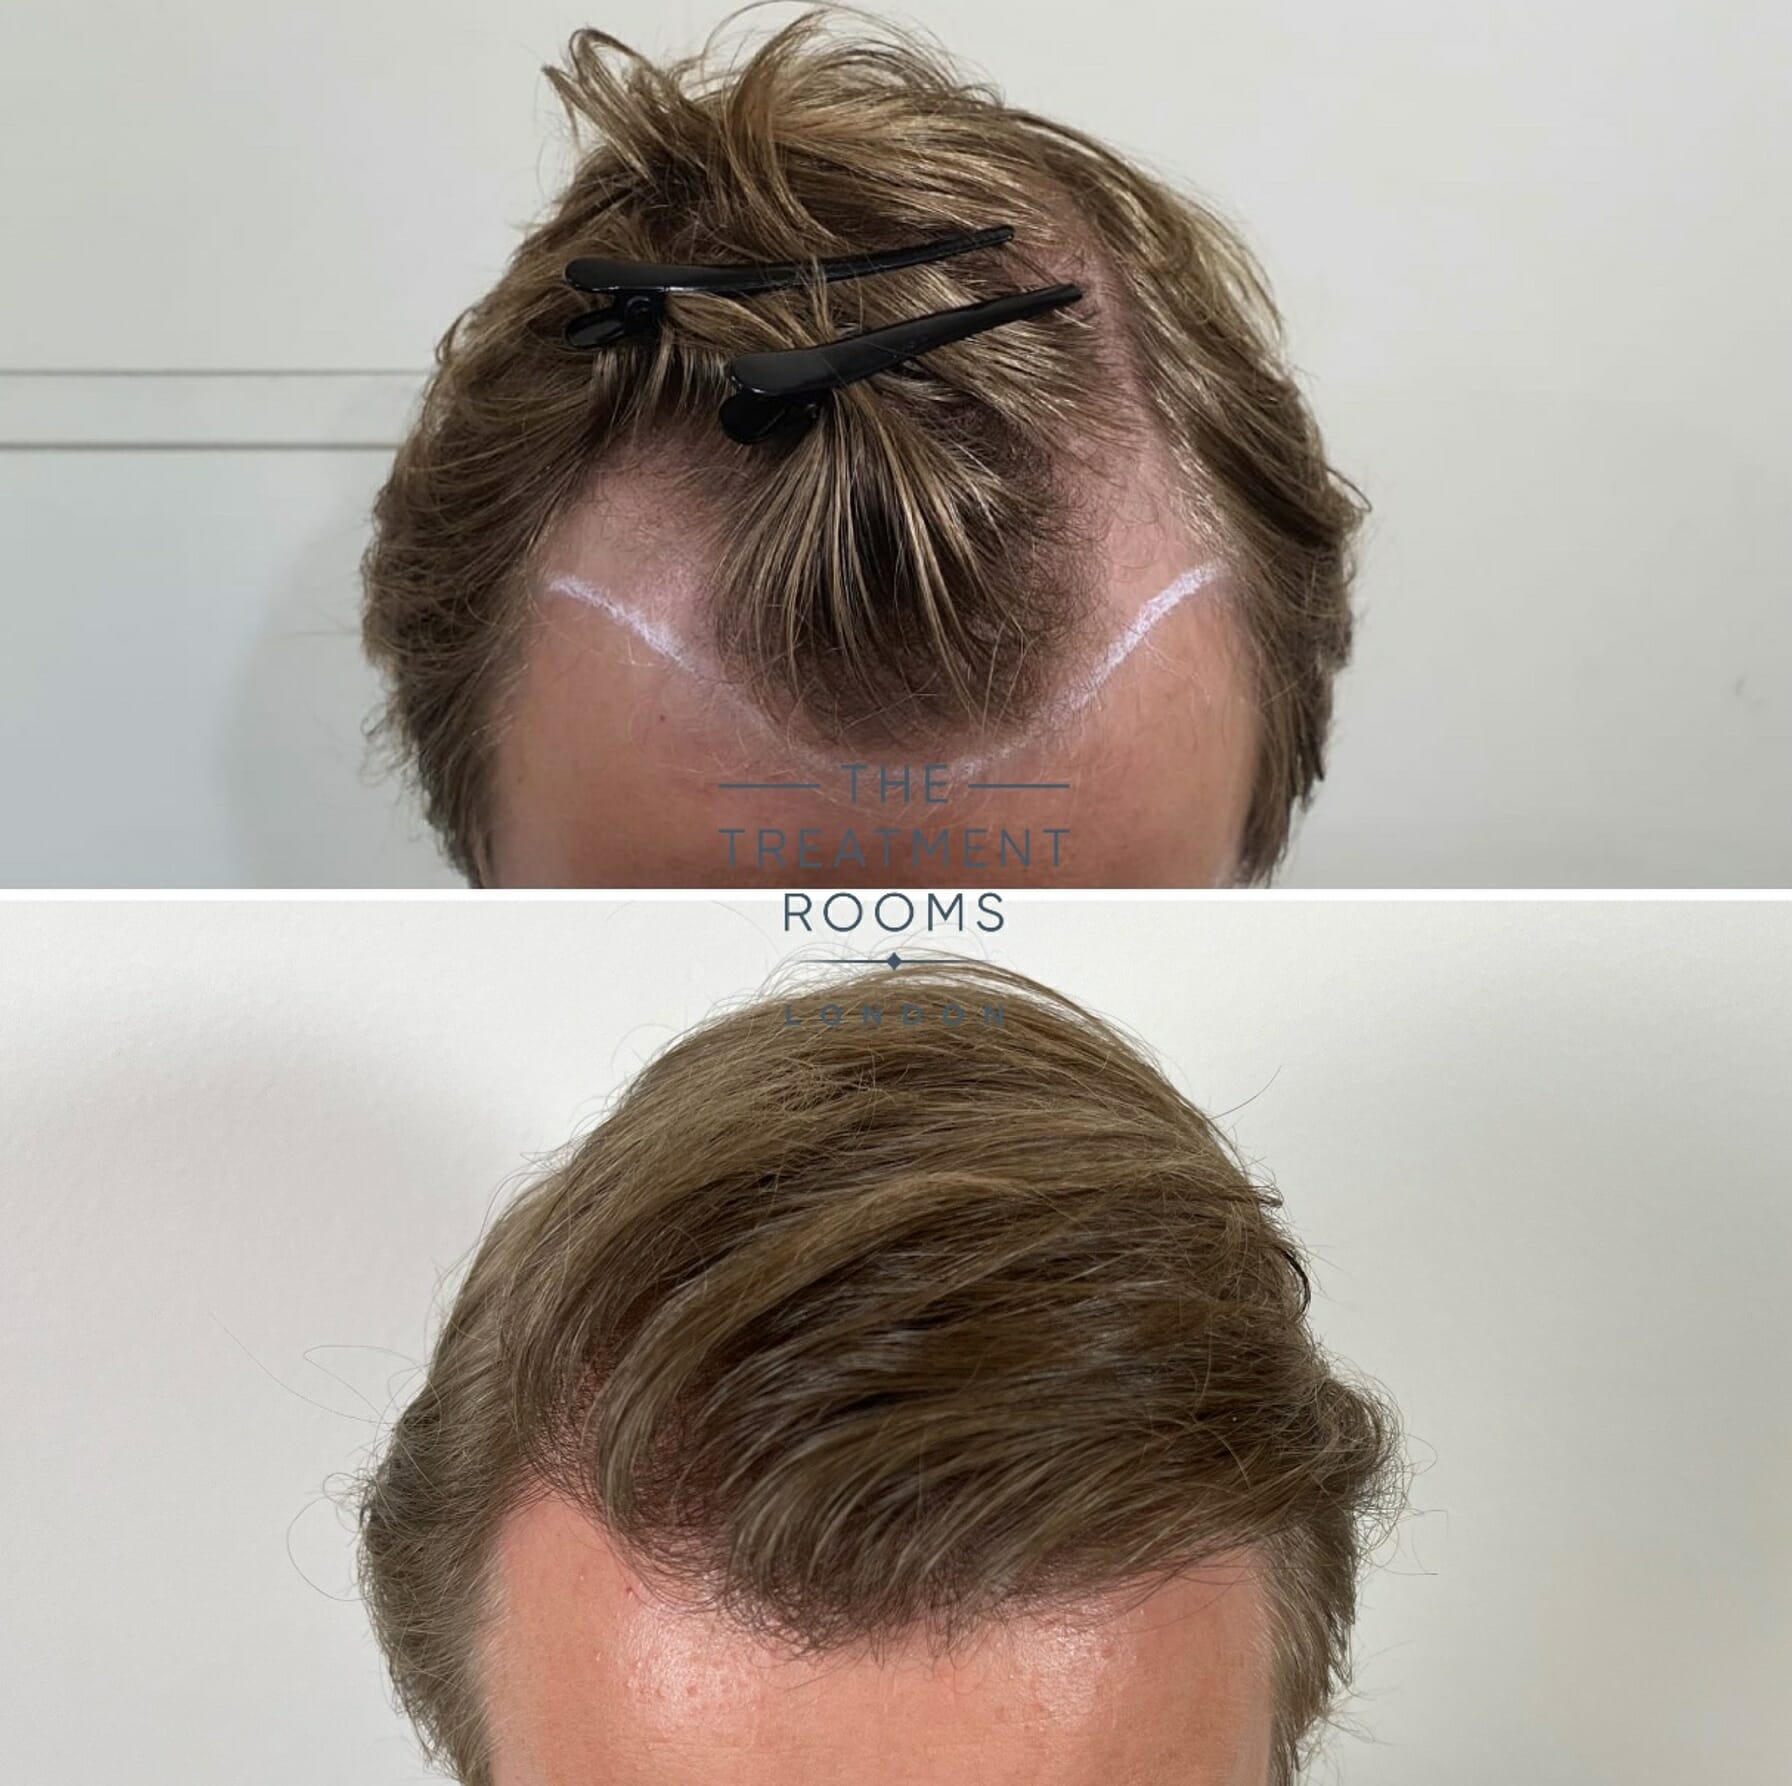 Temple hair transplant before and after